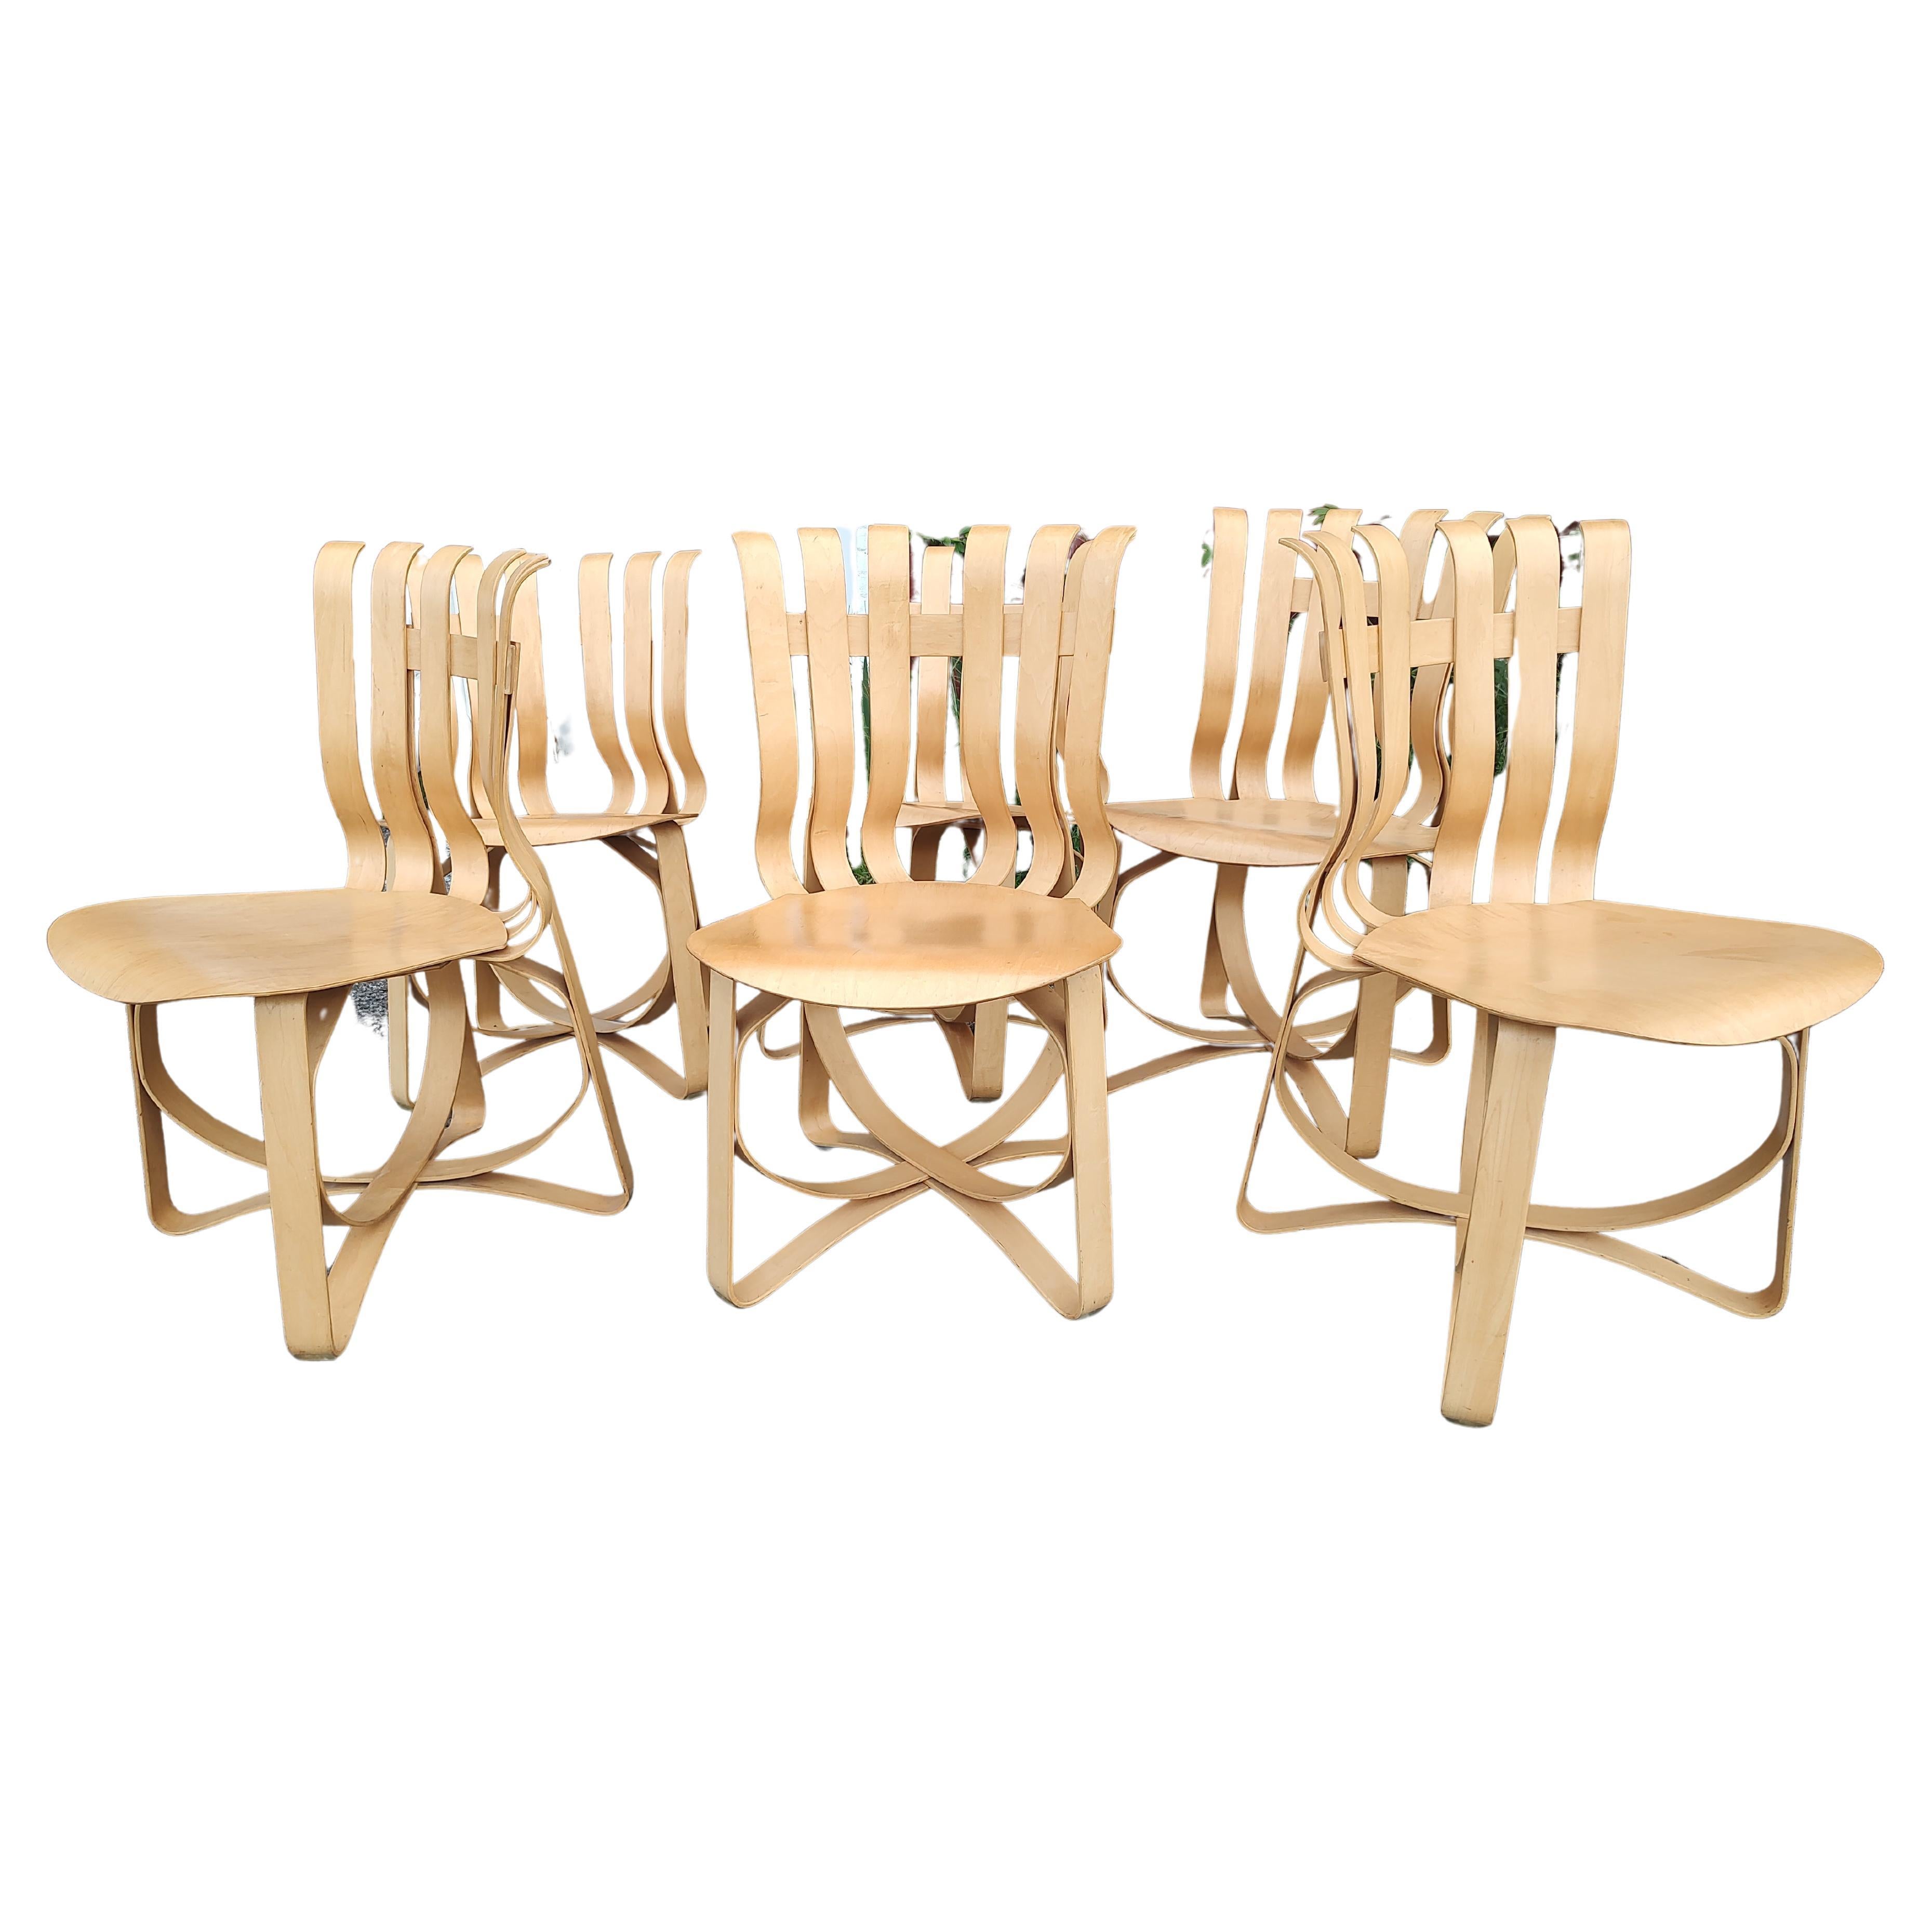 Mid Century Modern Sculptural Birch 6 Hat Trick Chairs by Frank Gehry - Knoll